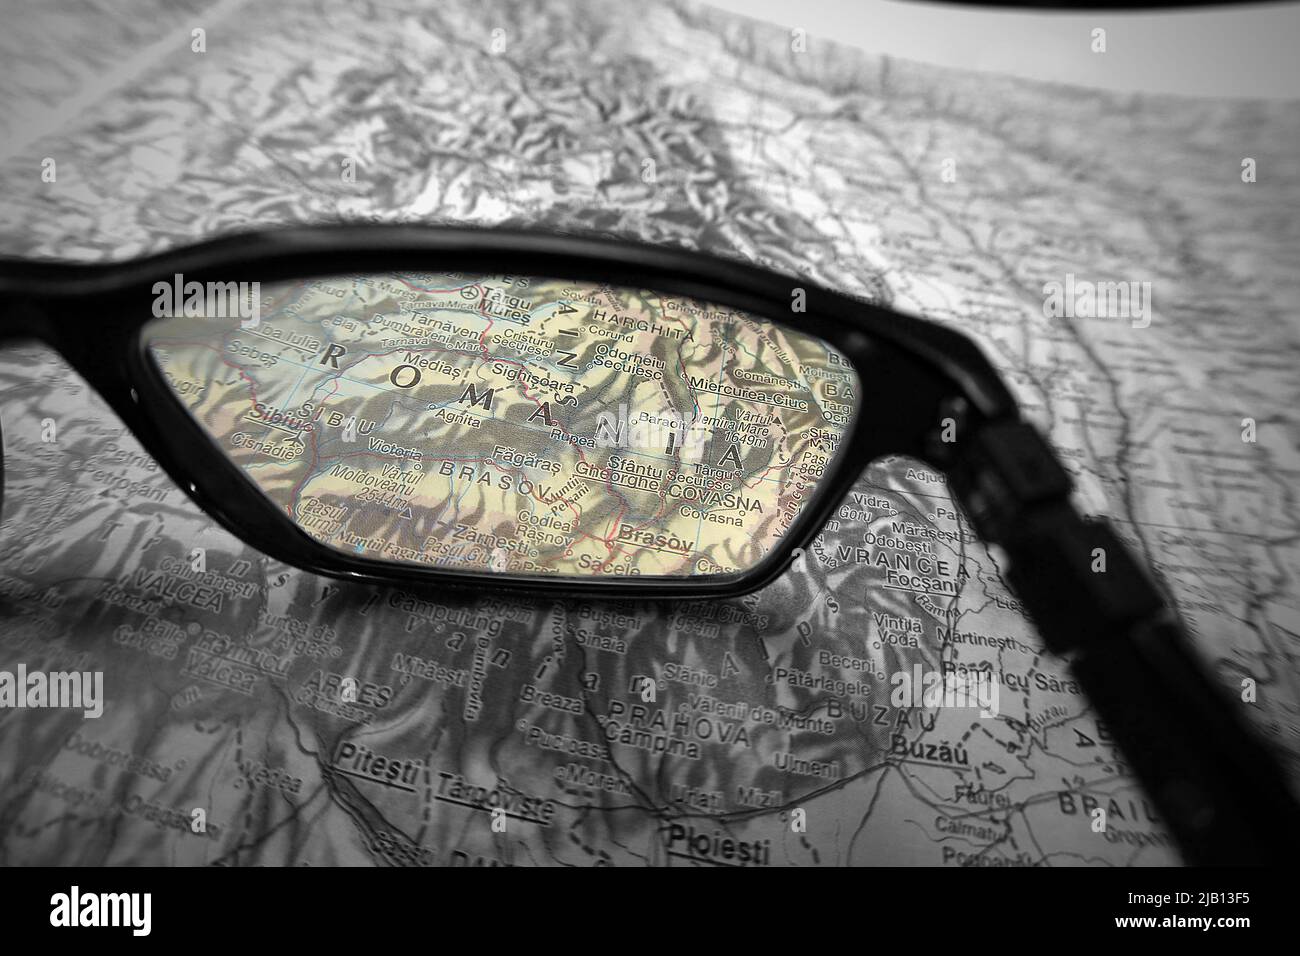 An creative illustrative image showing the country of Romania on a map through the lens of reading glasses. The area around the word Romania in colour Stock Photo